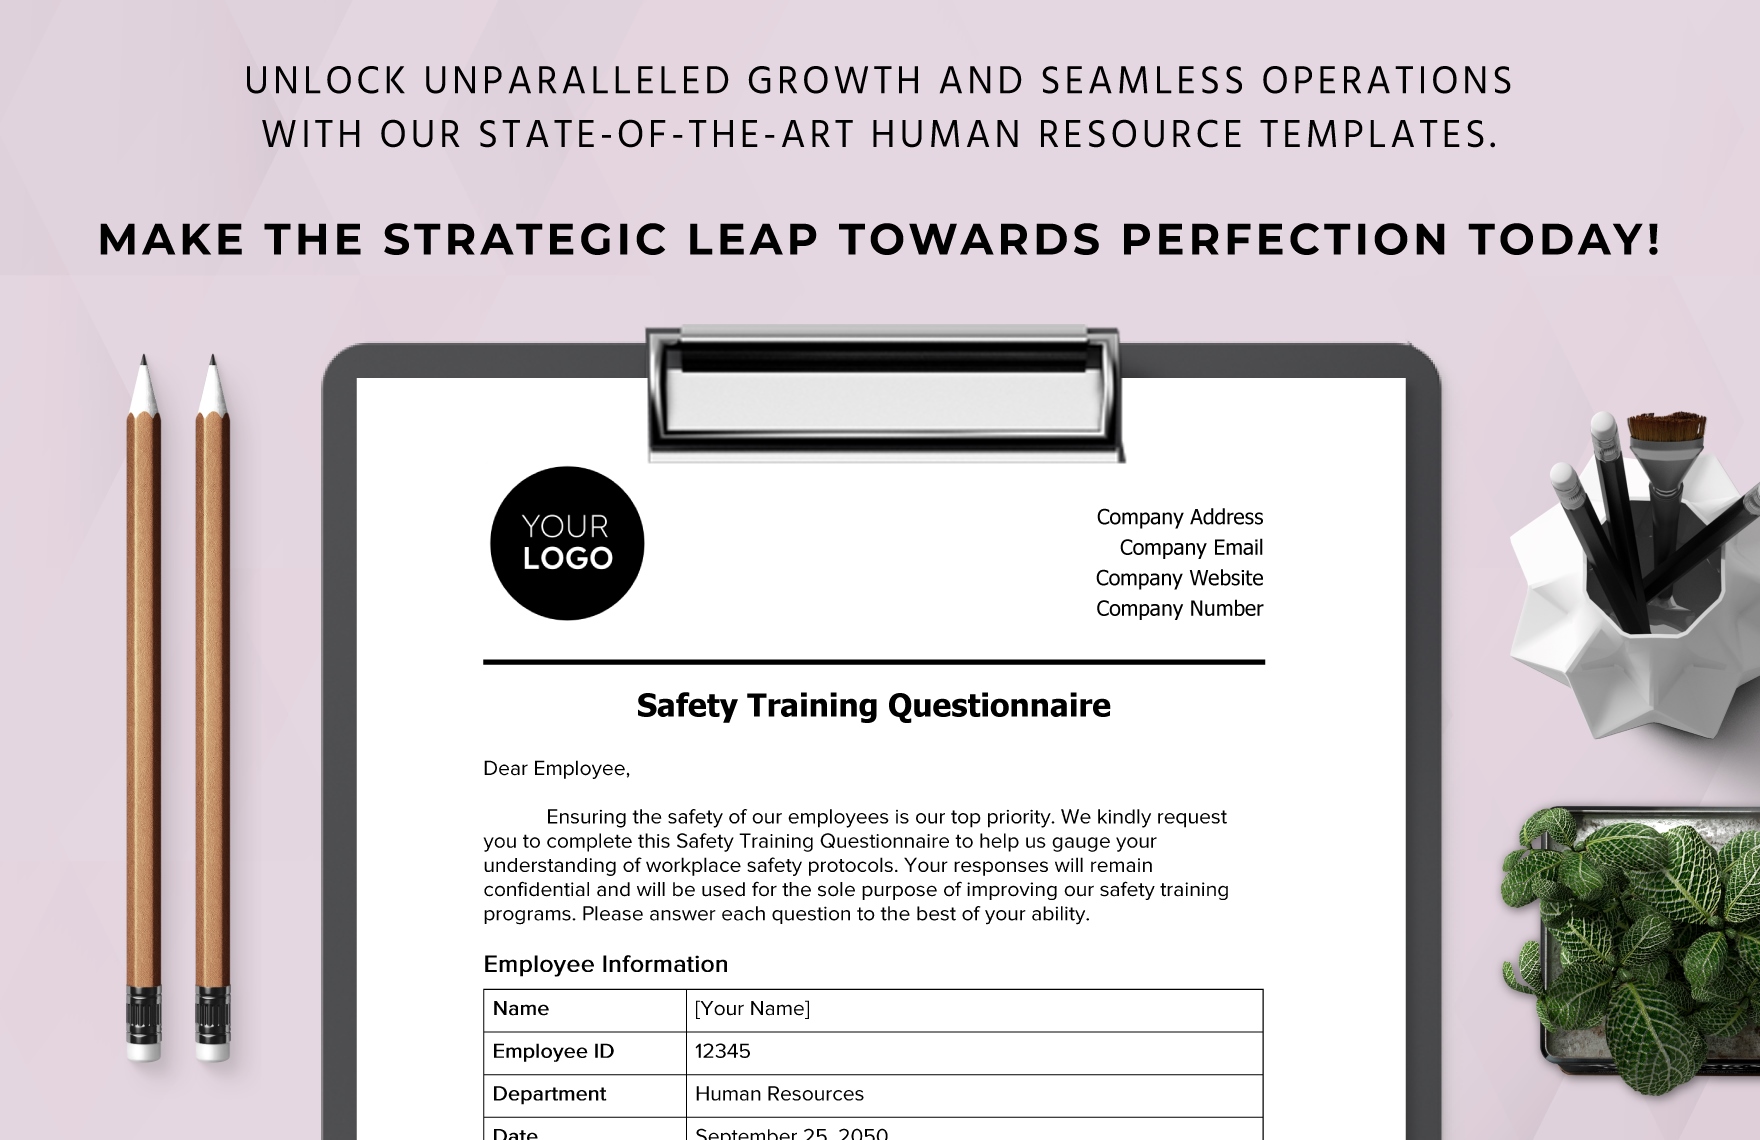 Safety Training Questionnaire HR Template